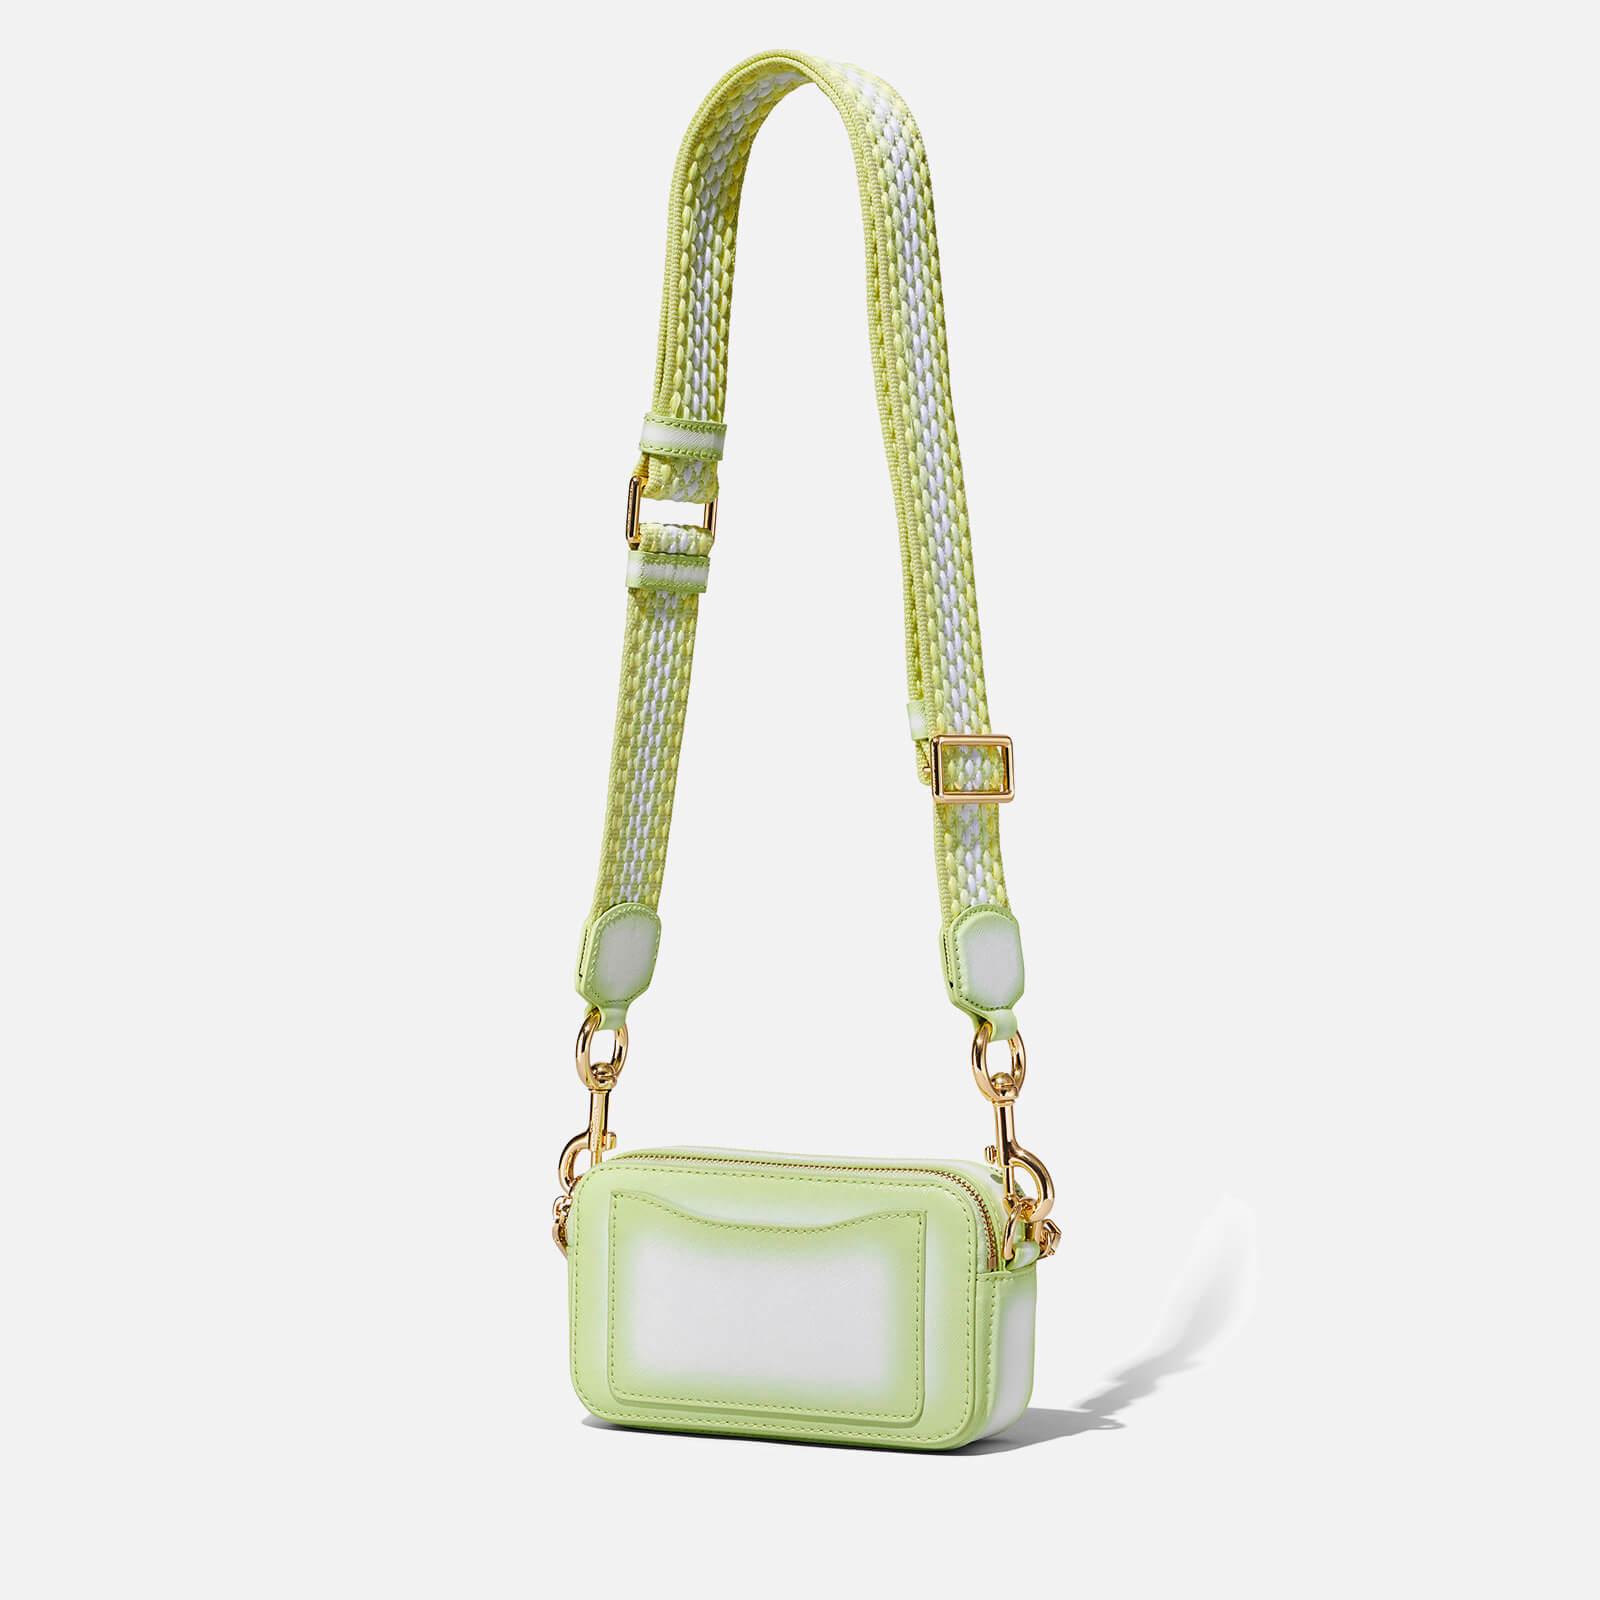 Marc Jacobs Leather The Fluoro Edge Snapshot Bag in Green - Save 